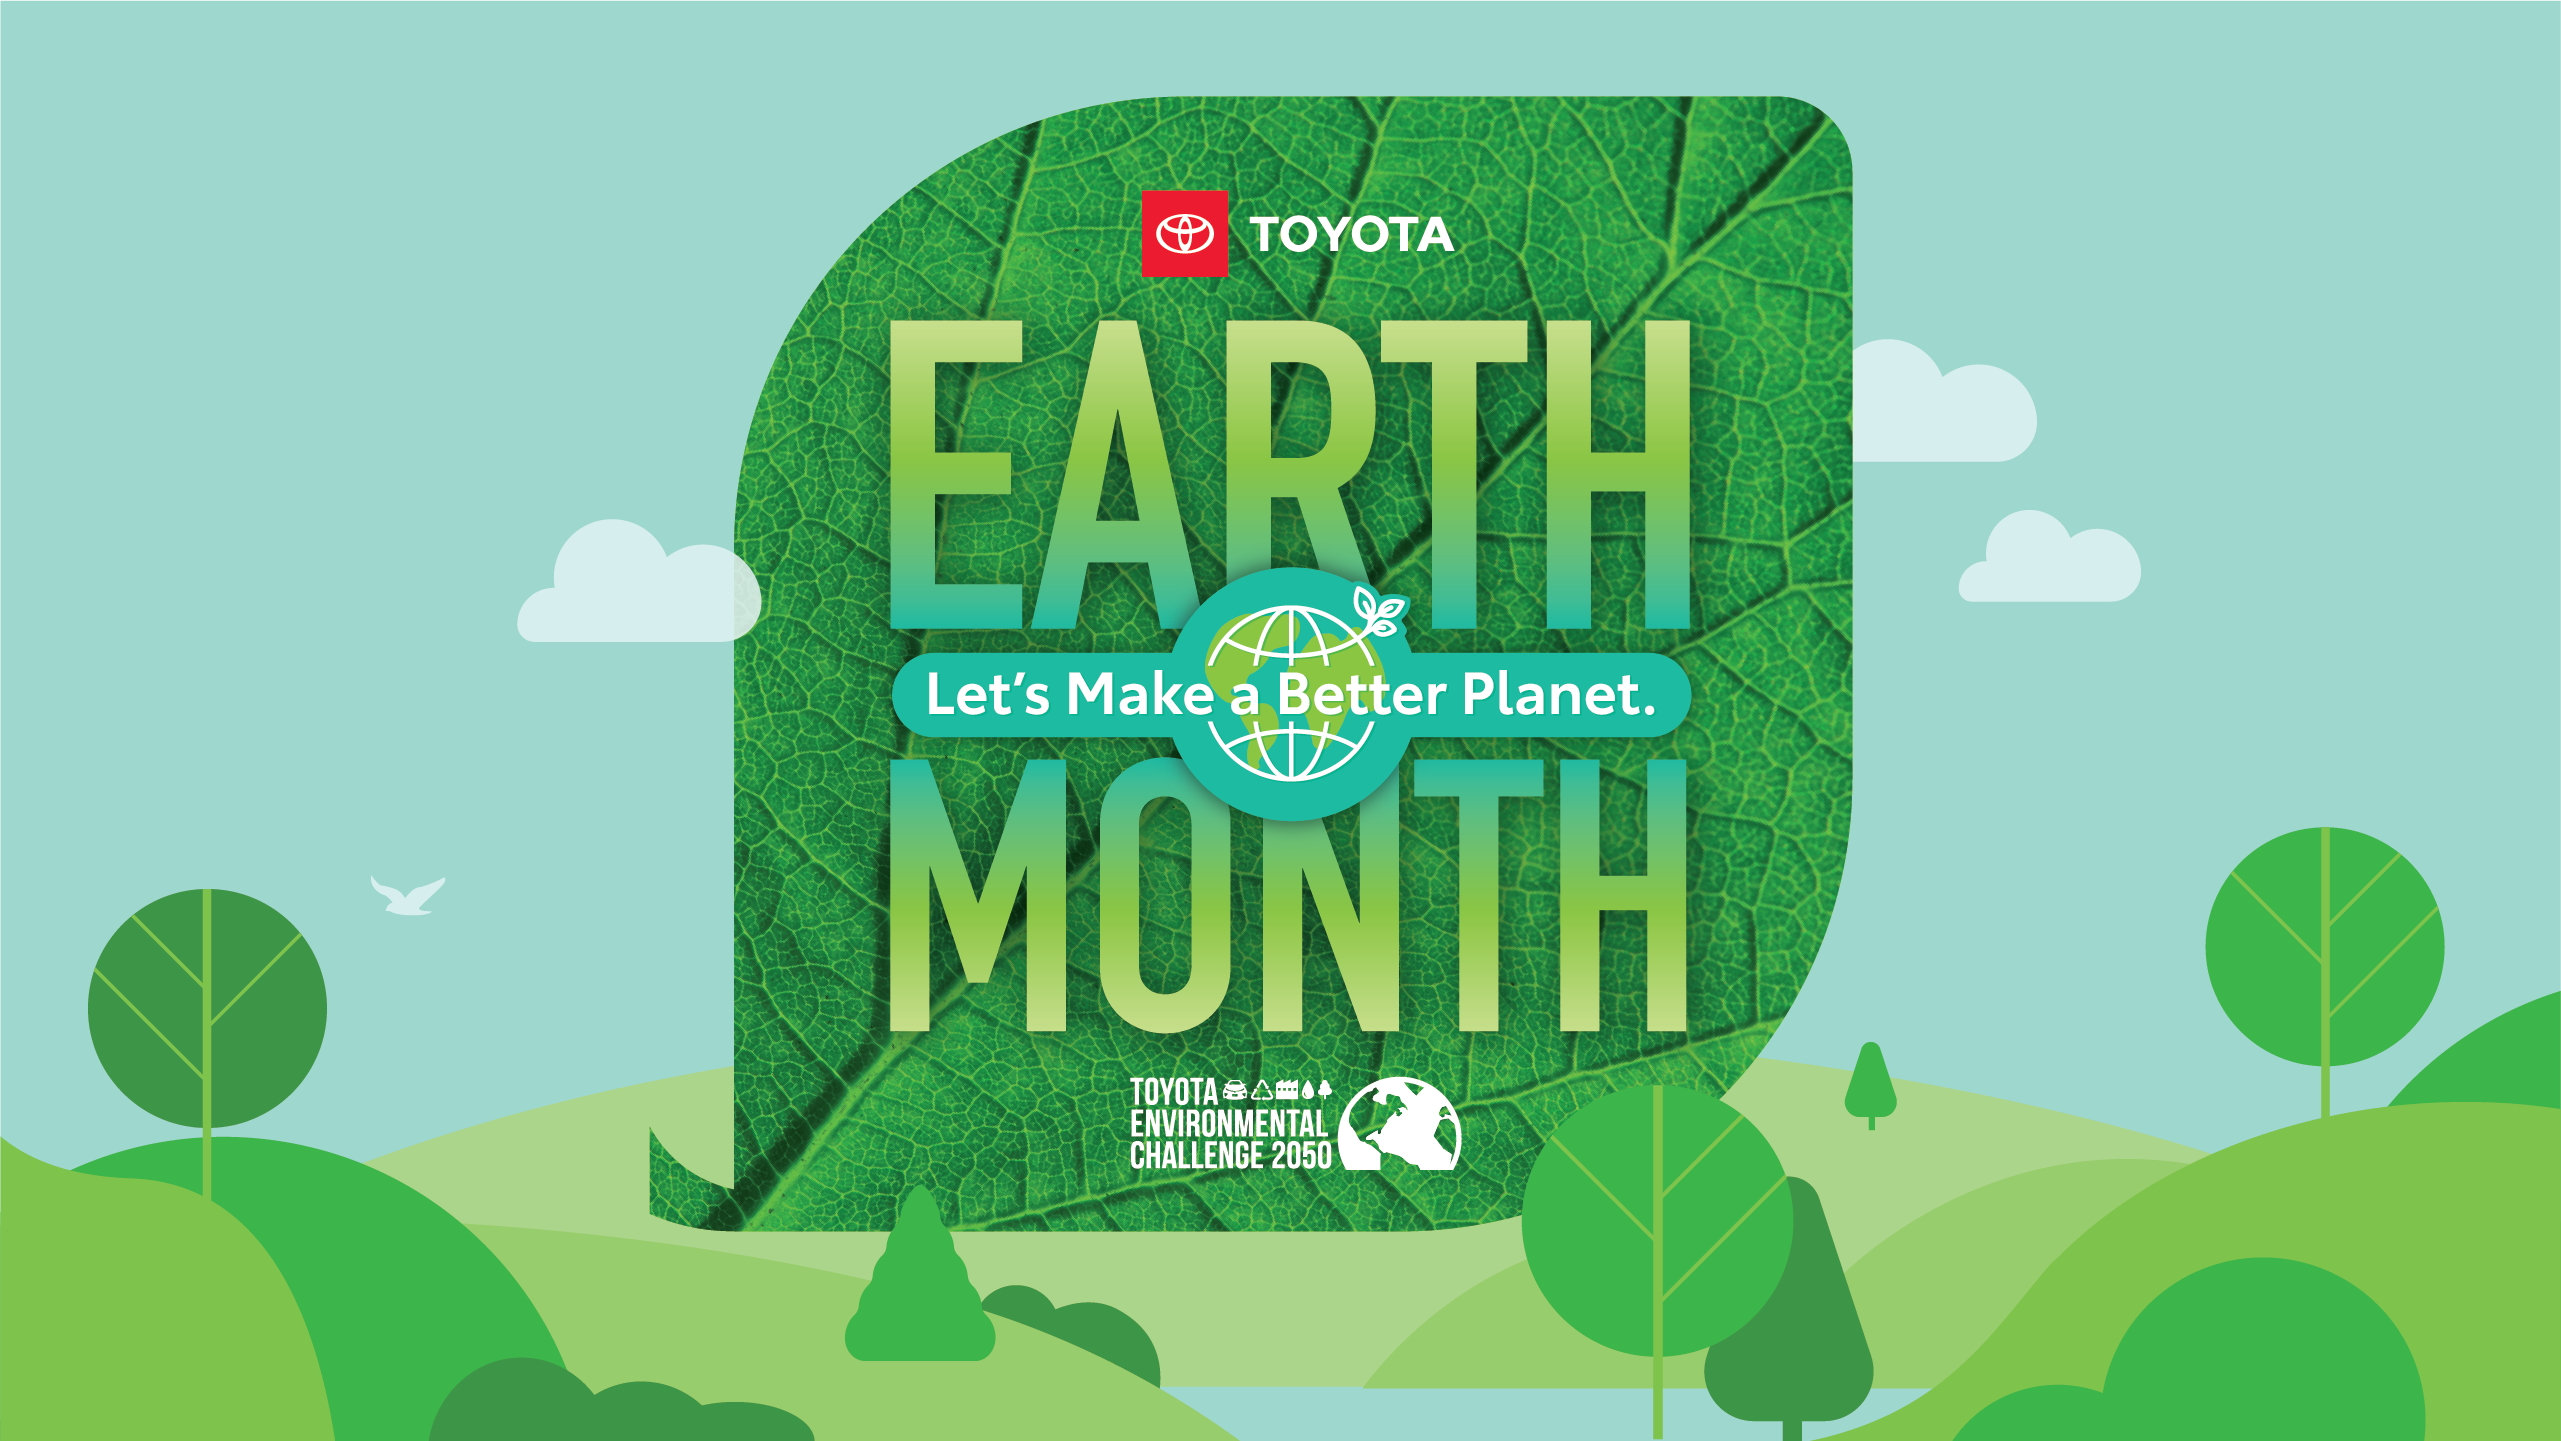 A graphic that reads "Toyota Earth Month, Let's Make a Better Planet",